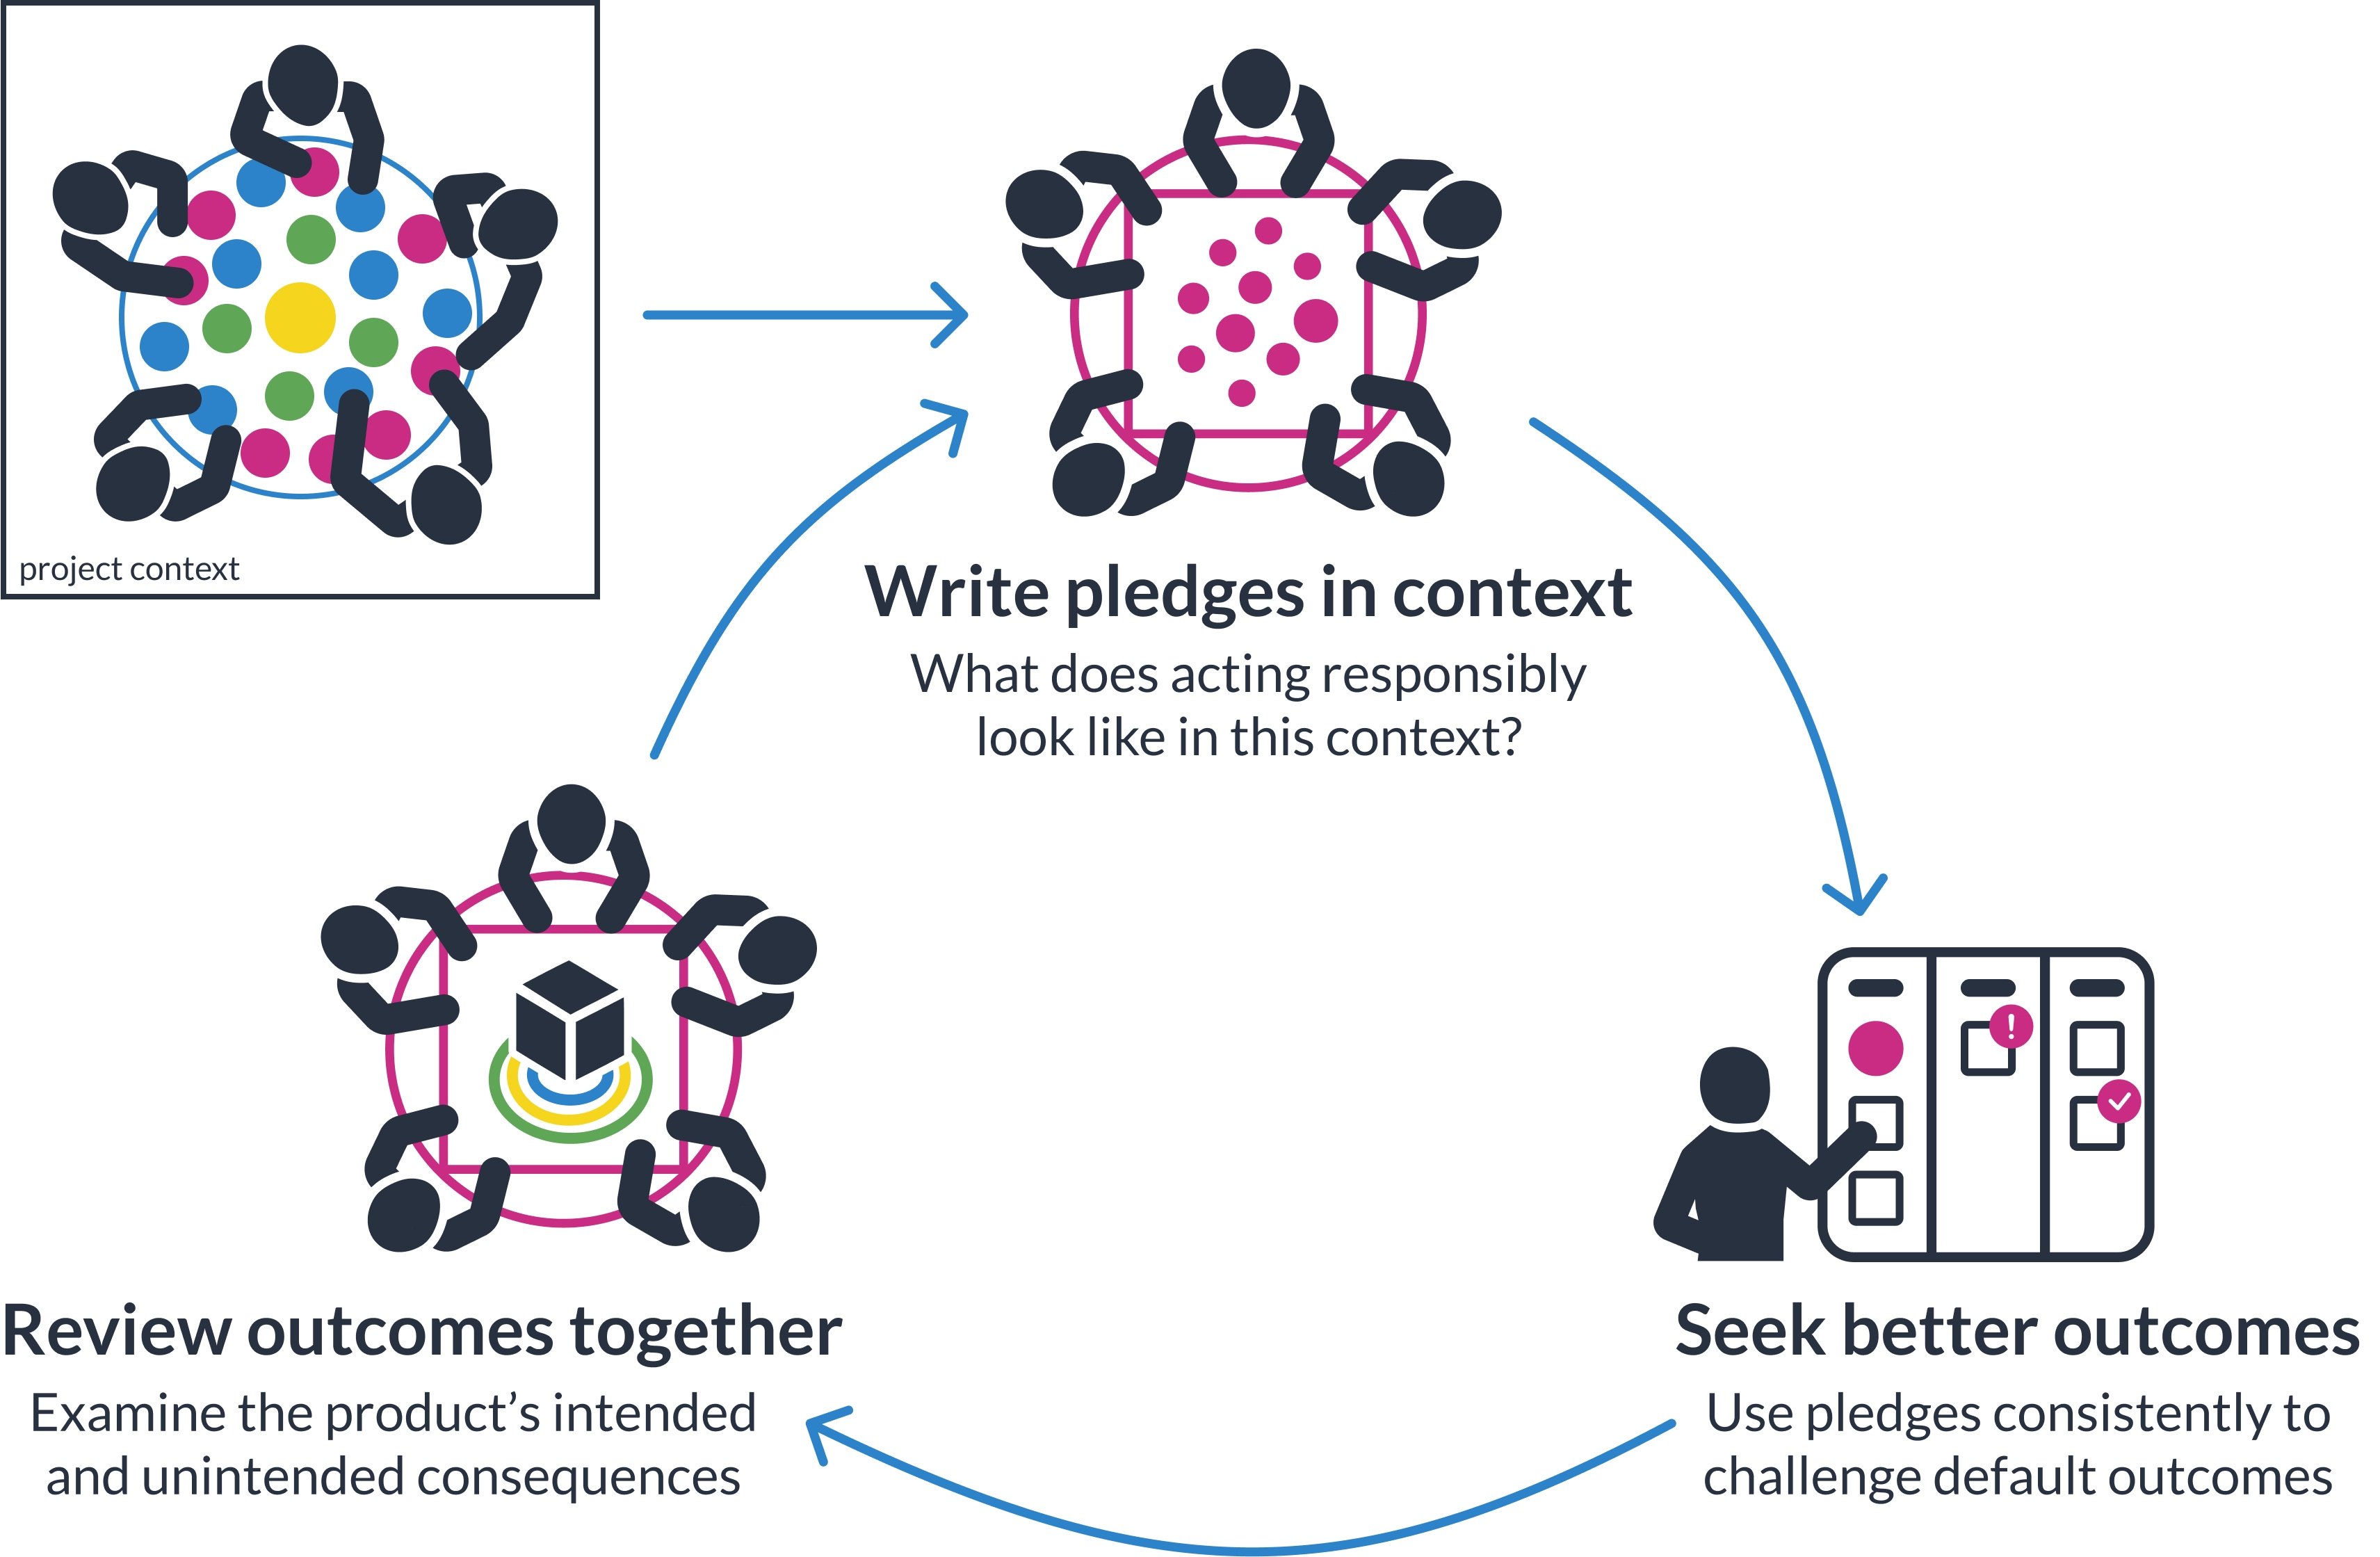 A graphic showing elements of the Pledge Works process. The process is described in detail in the attached link.